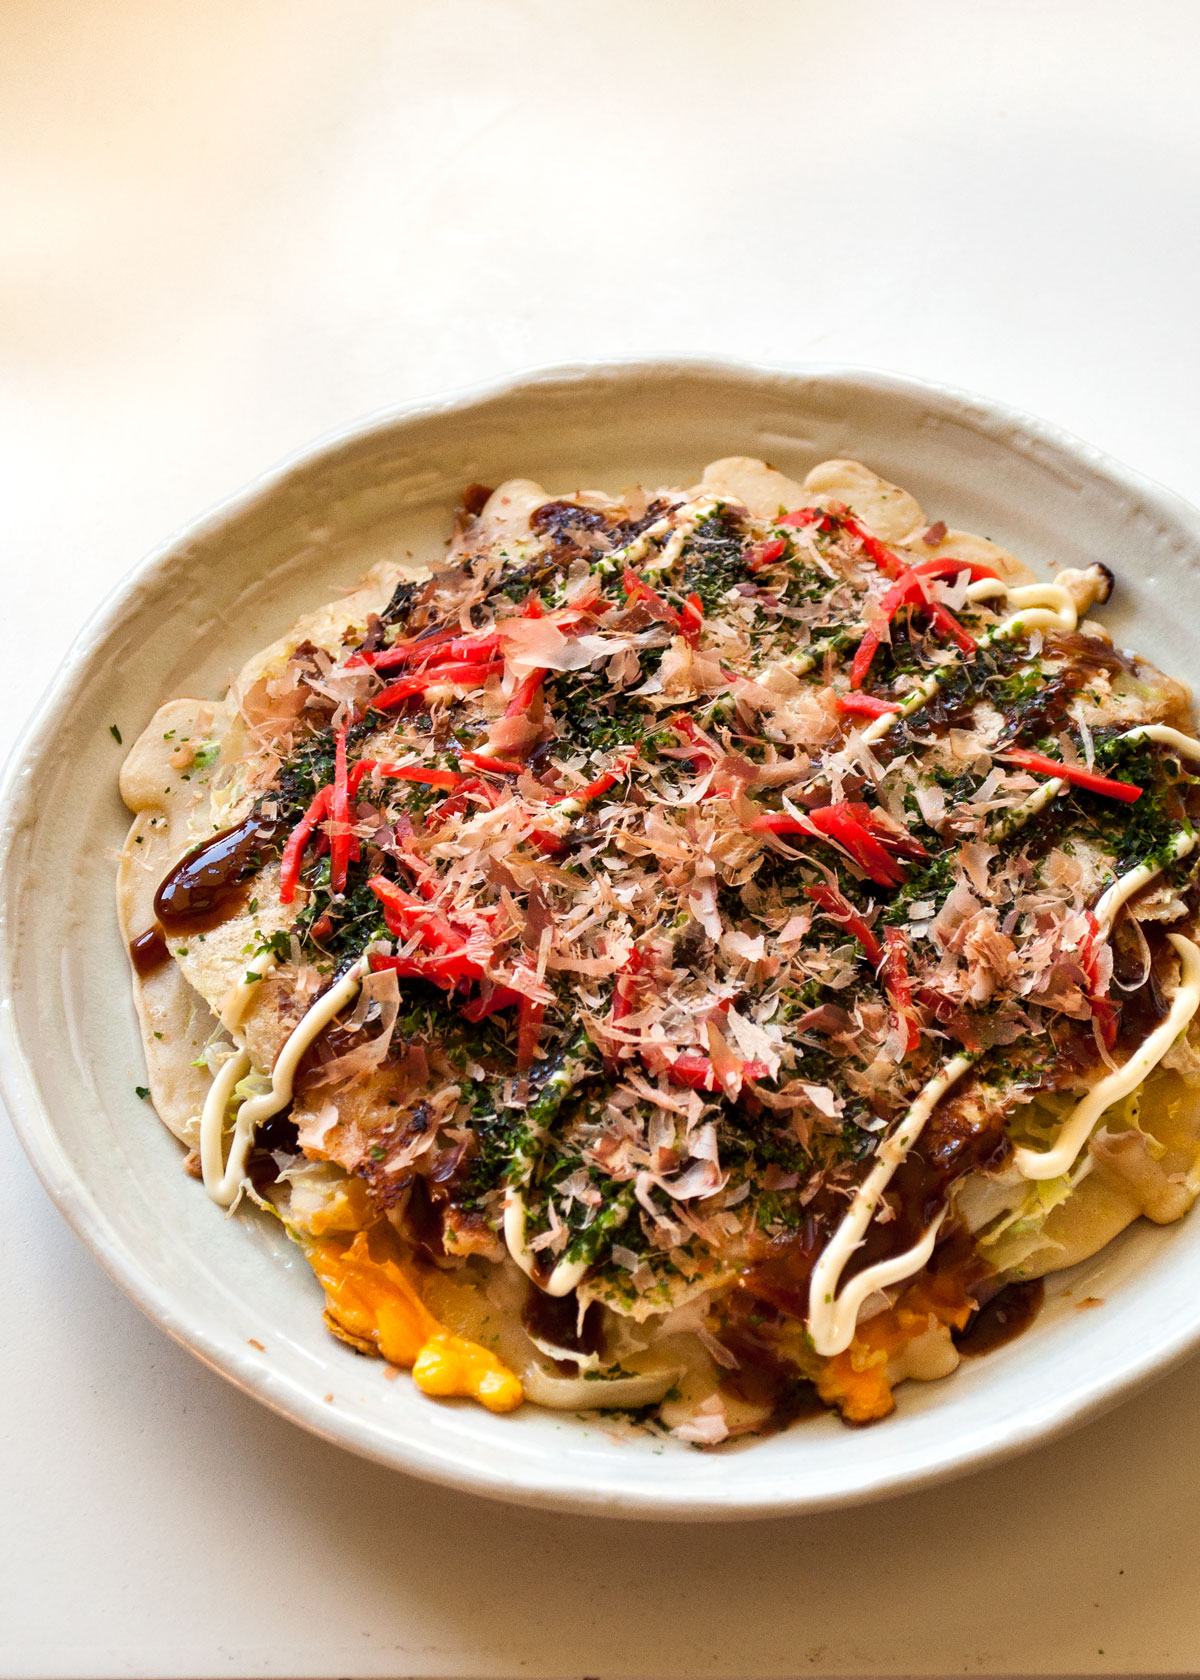 Okonomiyaki is the famous Japanese savory pancake that is usually cooked at the dining table so you can customize it to your taste.